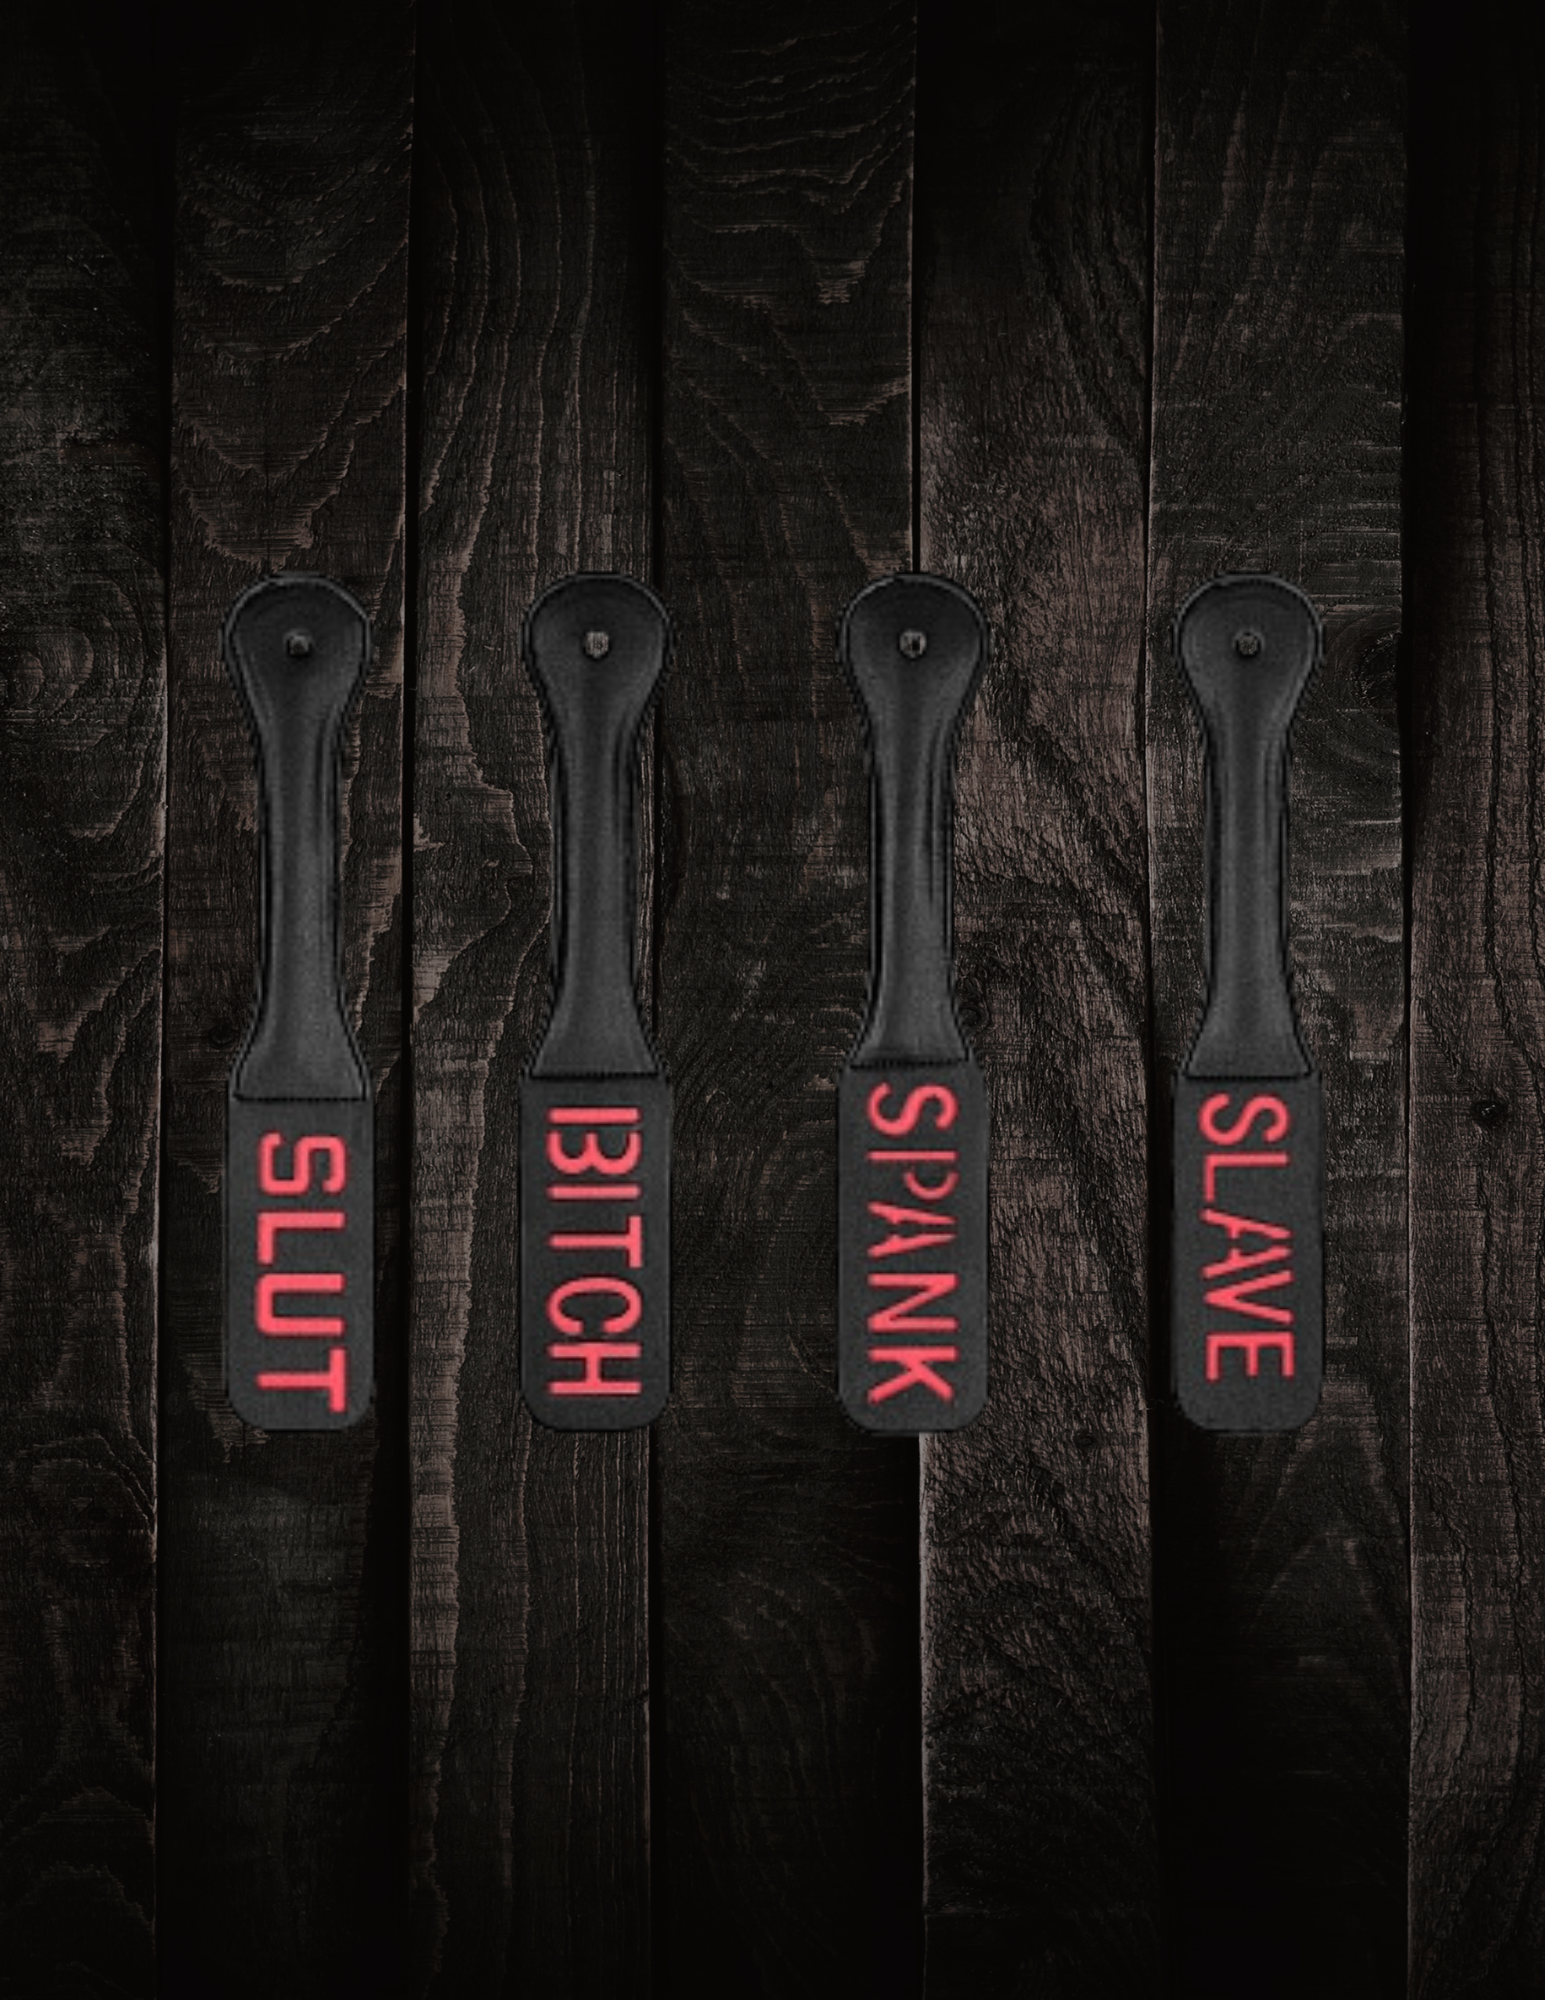 Group images of the Ouch! Bonded Leather Paddles from Shots.